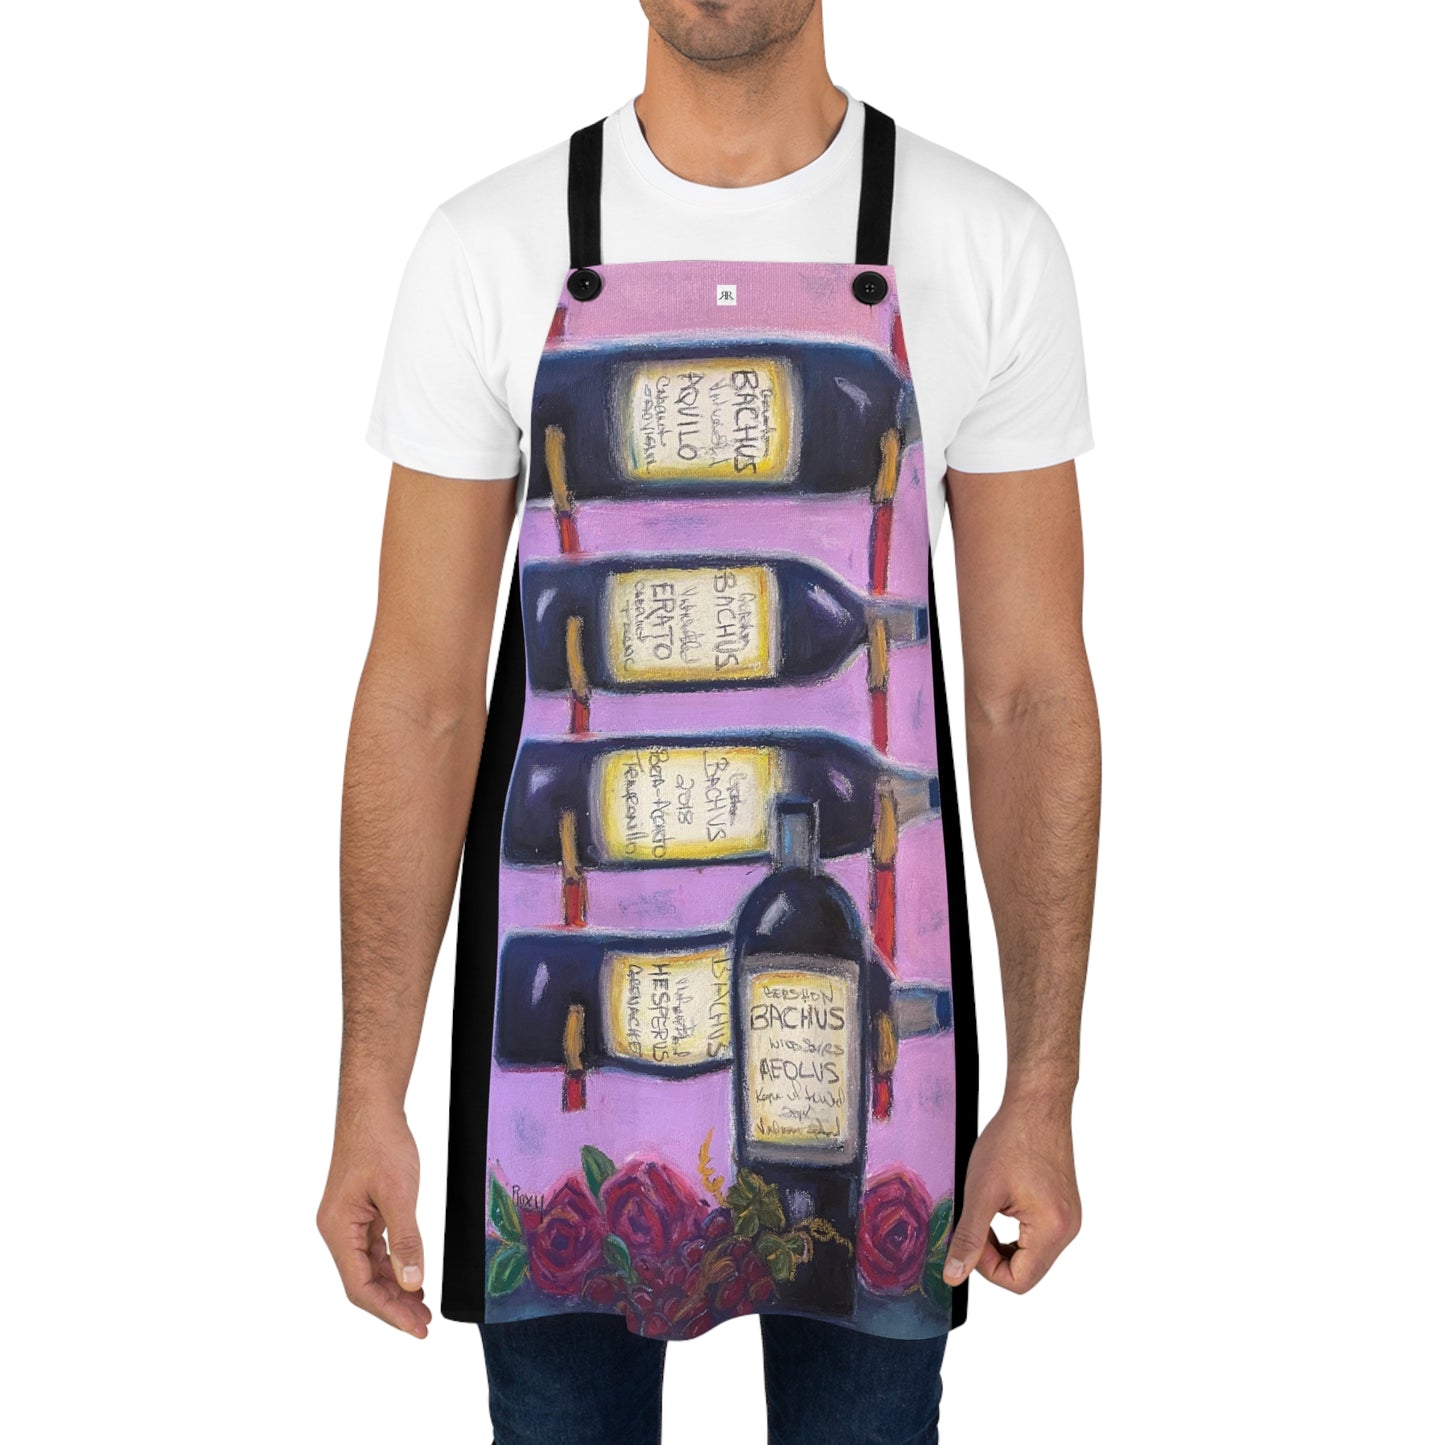 Bachus Reserves (GBV Wine rack and Roses) Apron